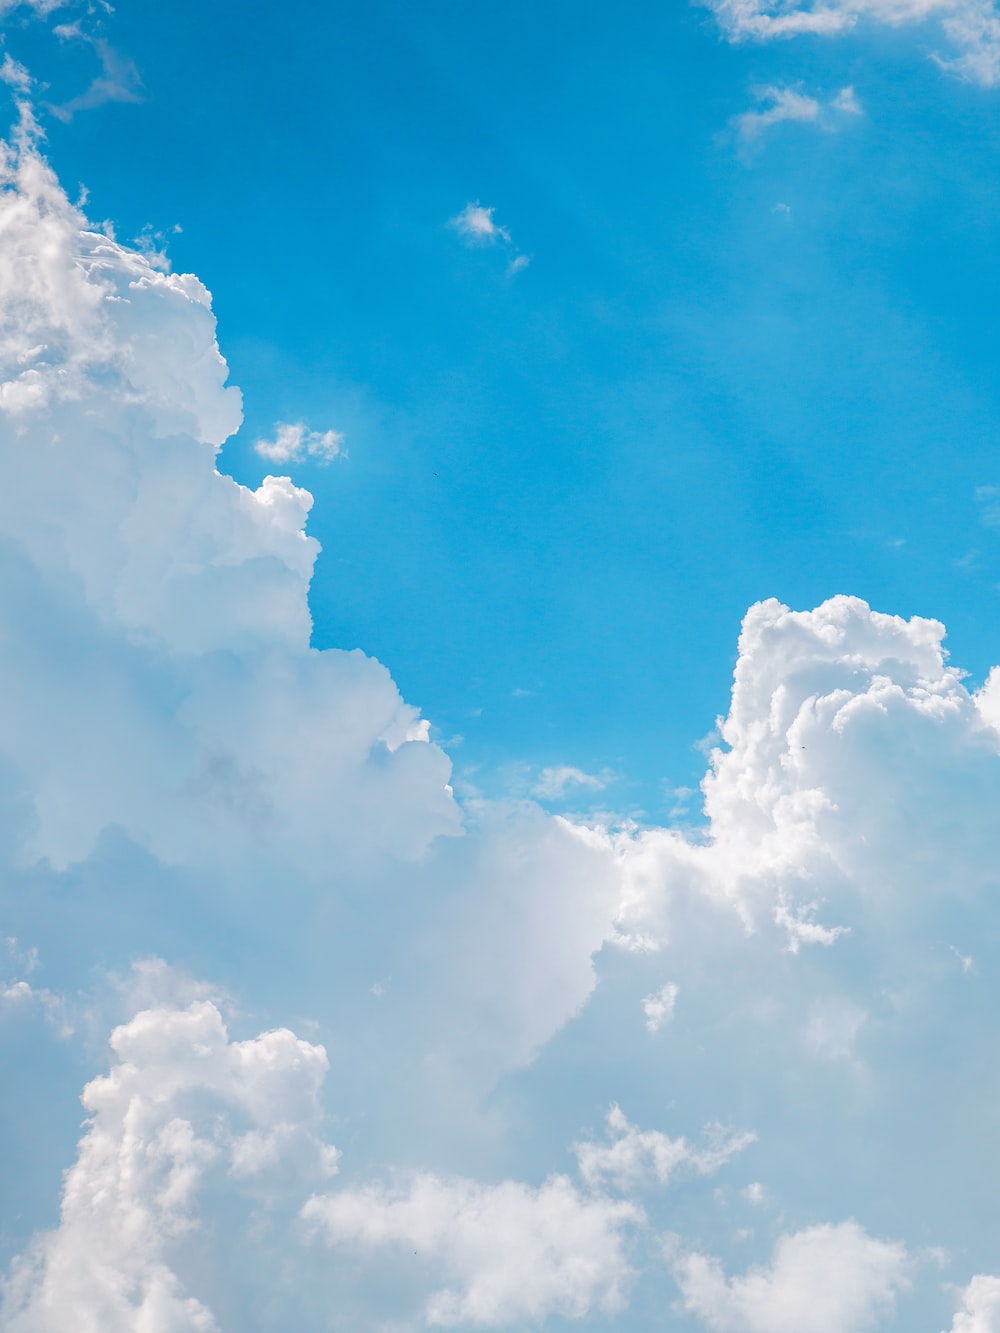 Blue Sky With Cloud Pictures Image